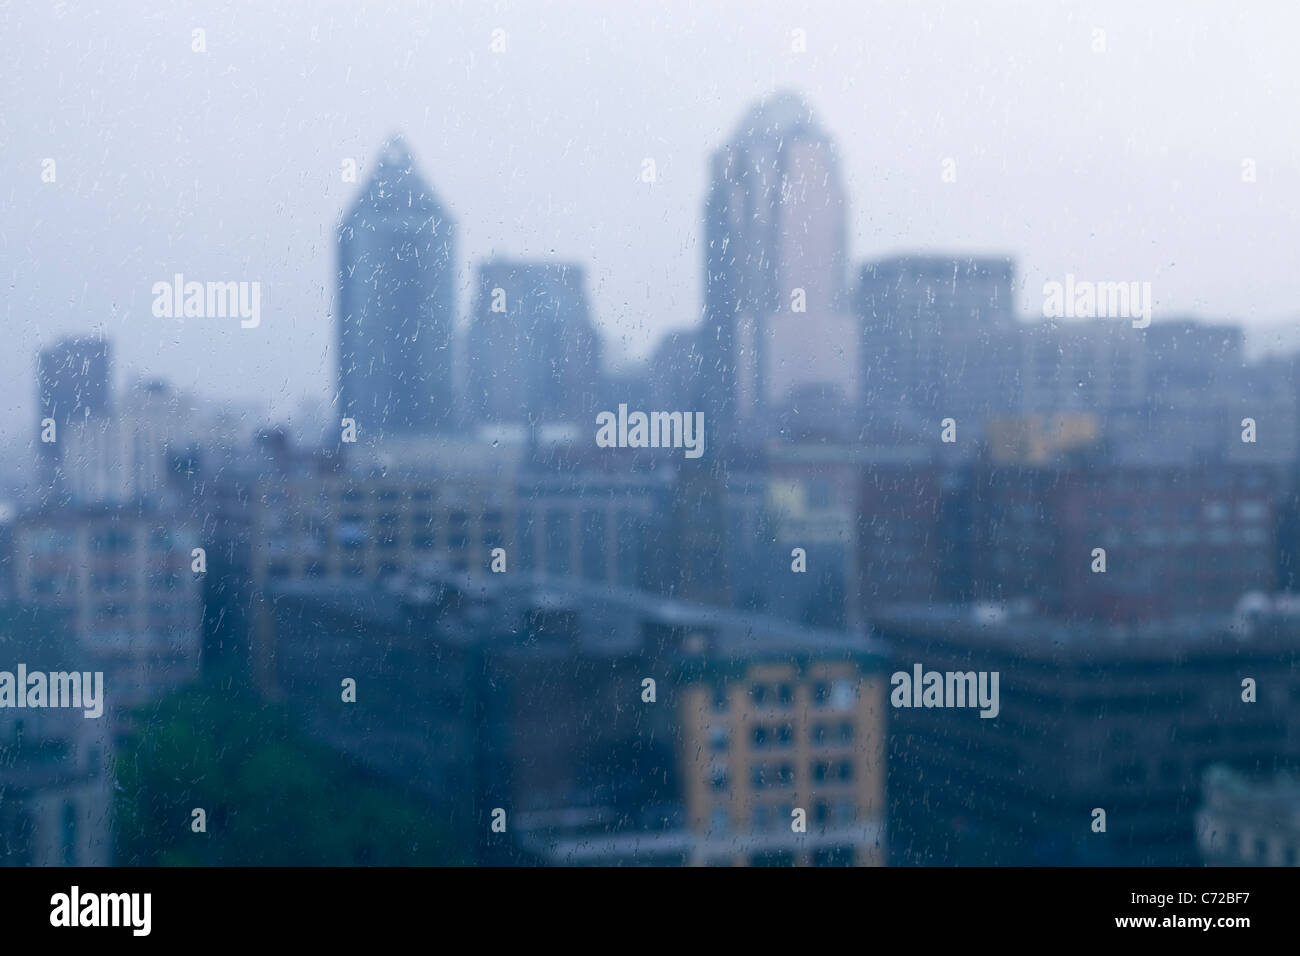 Canada,Quebec,Montreal,view of Montreal buildings through a rainy window Stock Photo